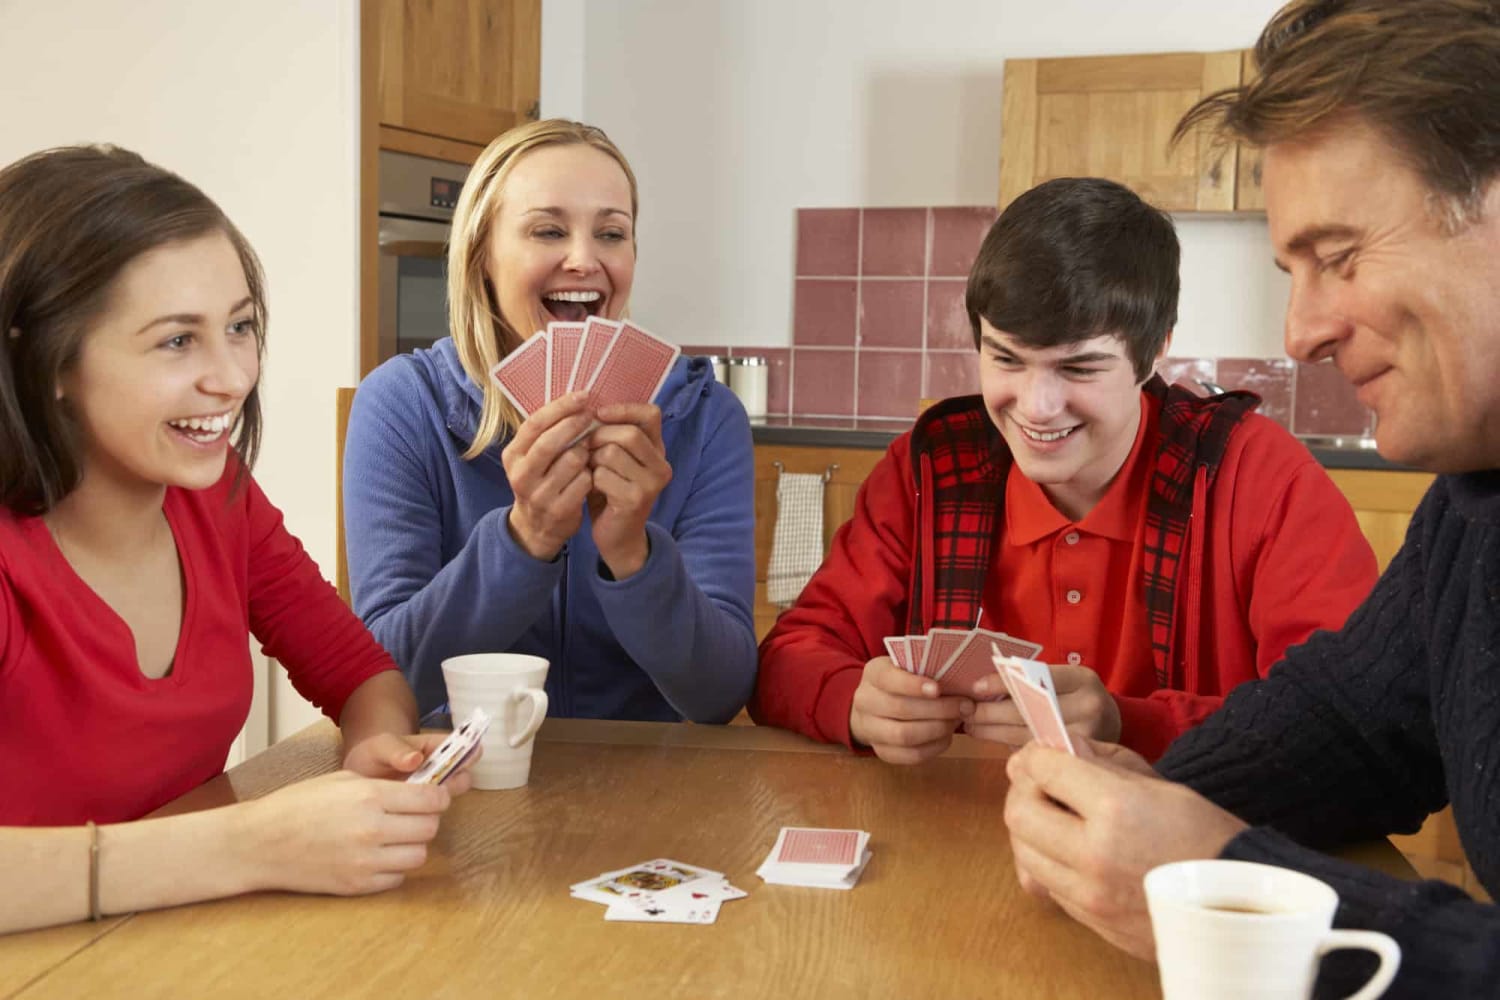 Top 15 Fun And Easy Card Games to Play As A Family